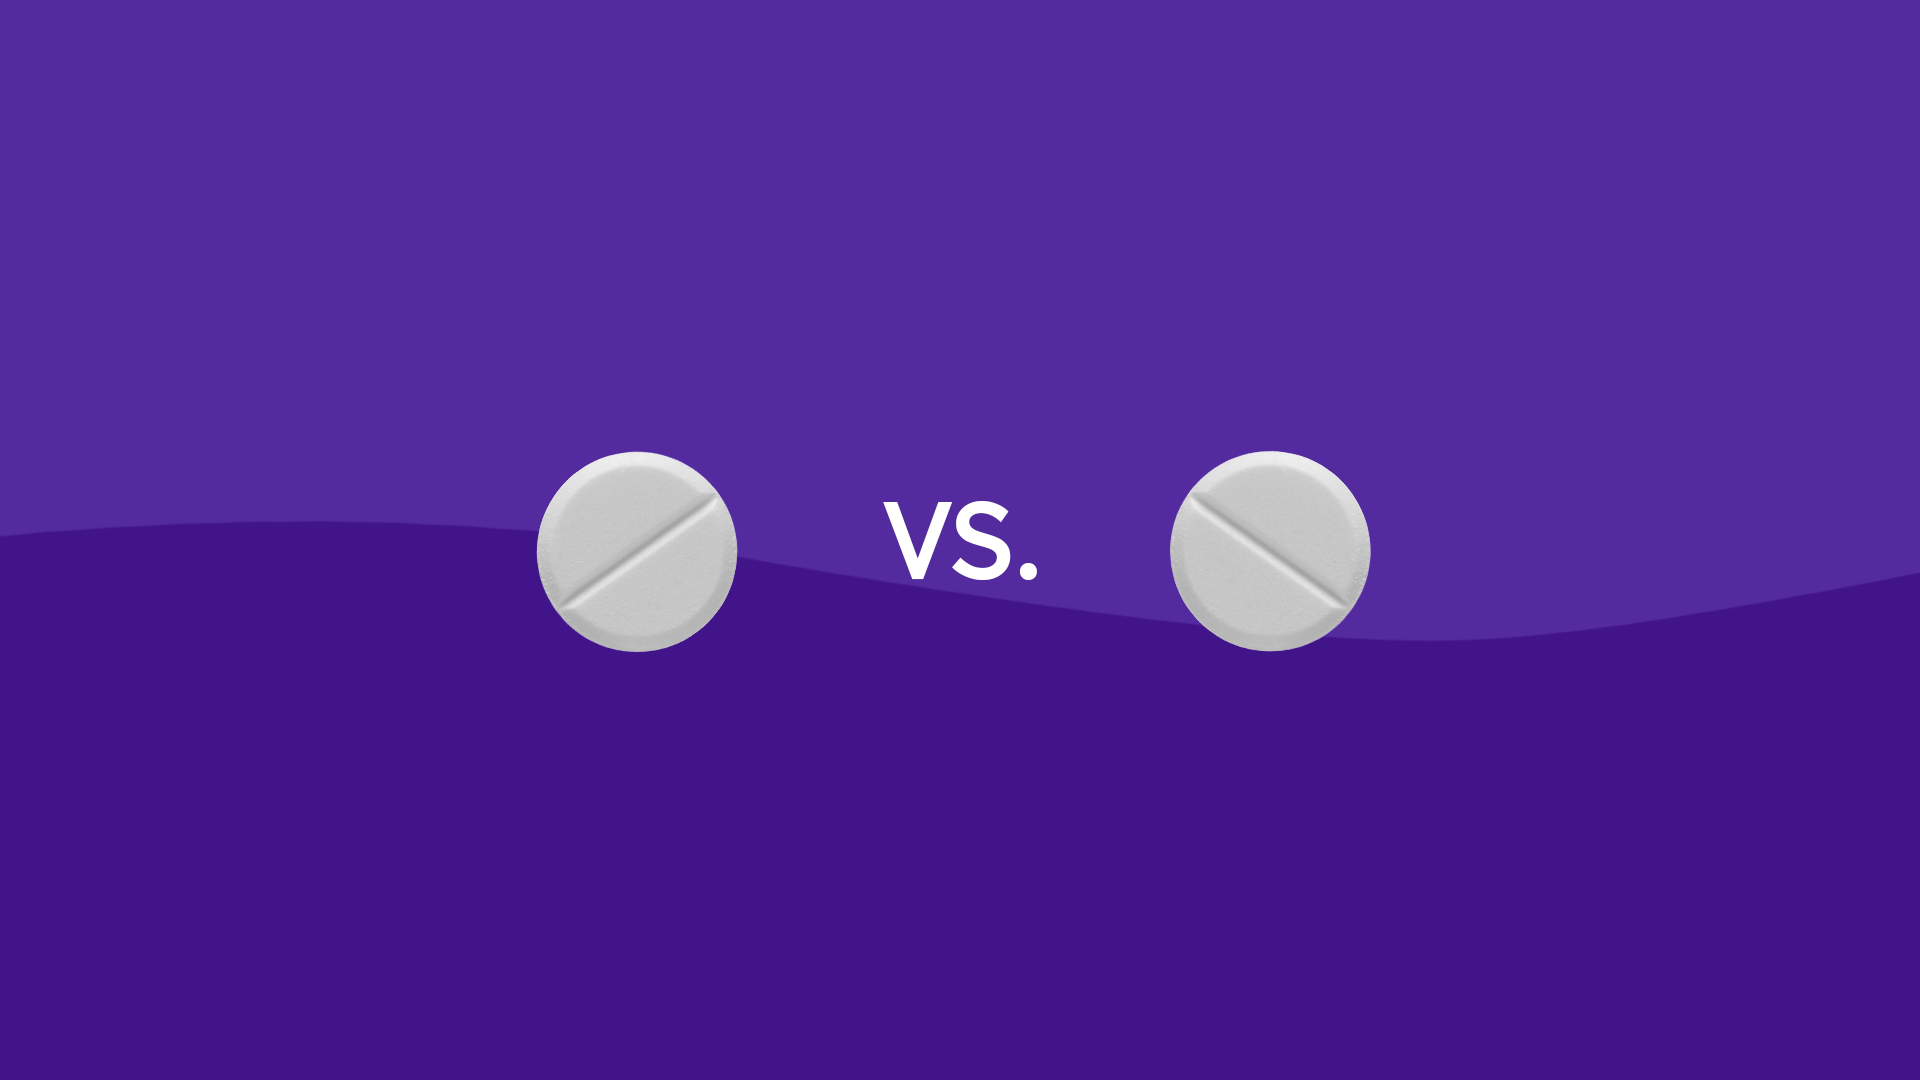 Vyvanse vs. Adderall: Differences, similarities, and which one is better